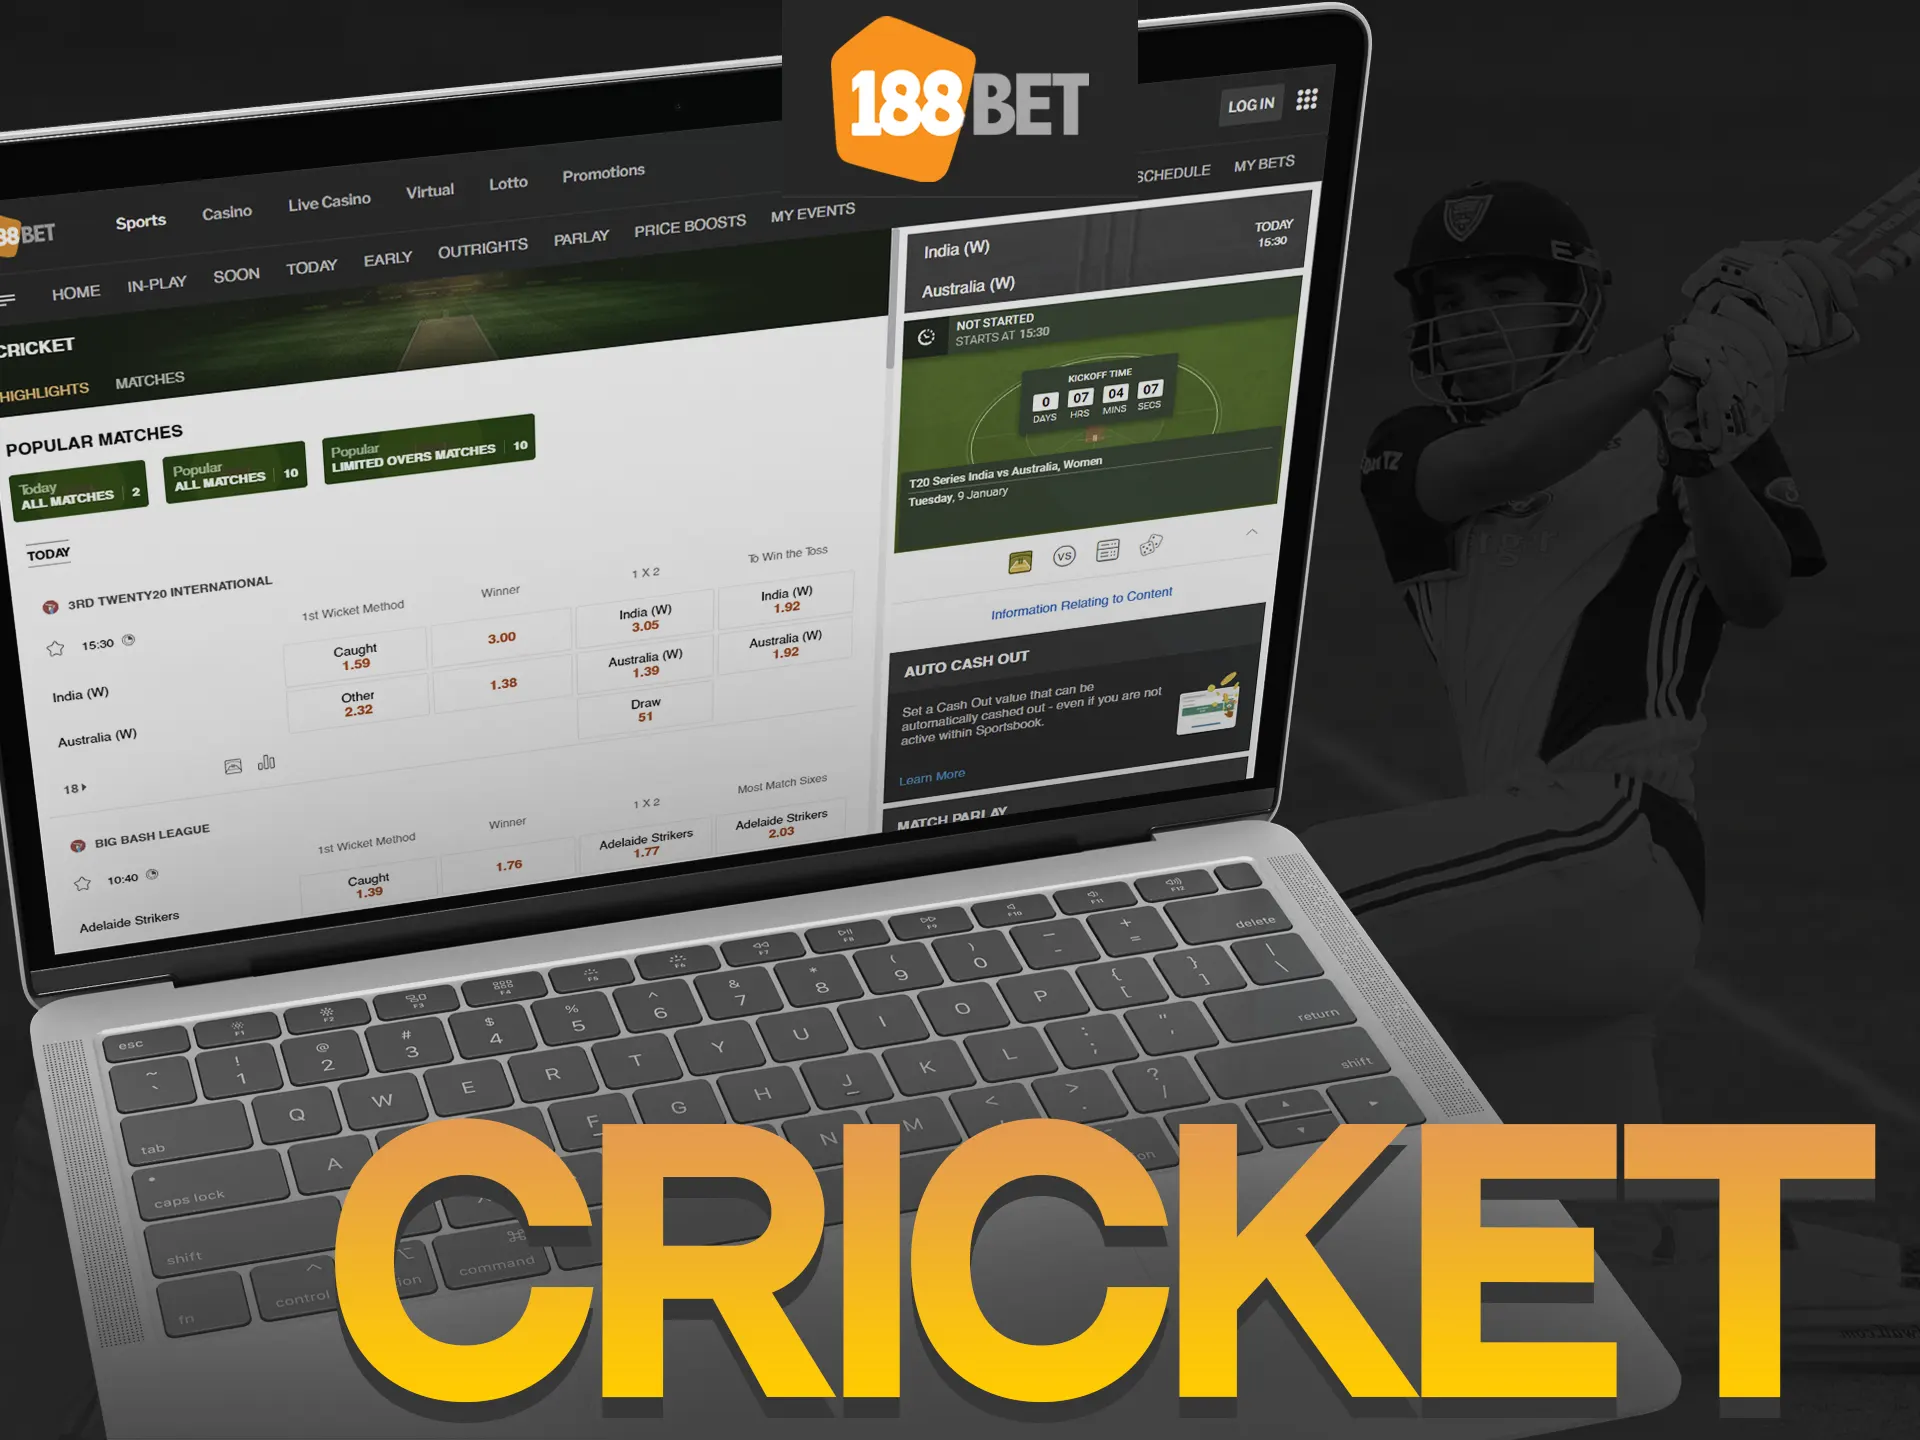 Place your cricket bets with 188bet.